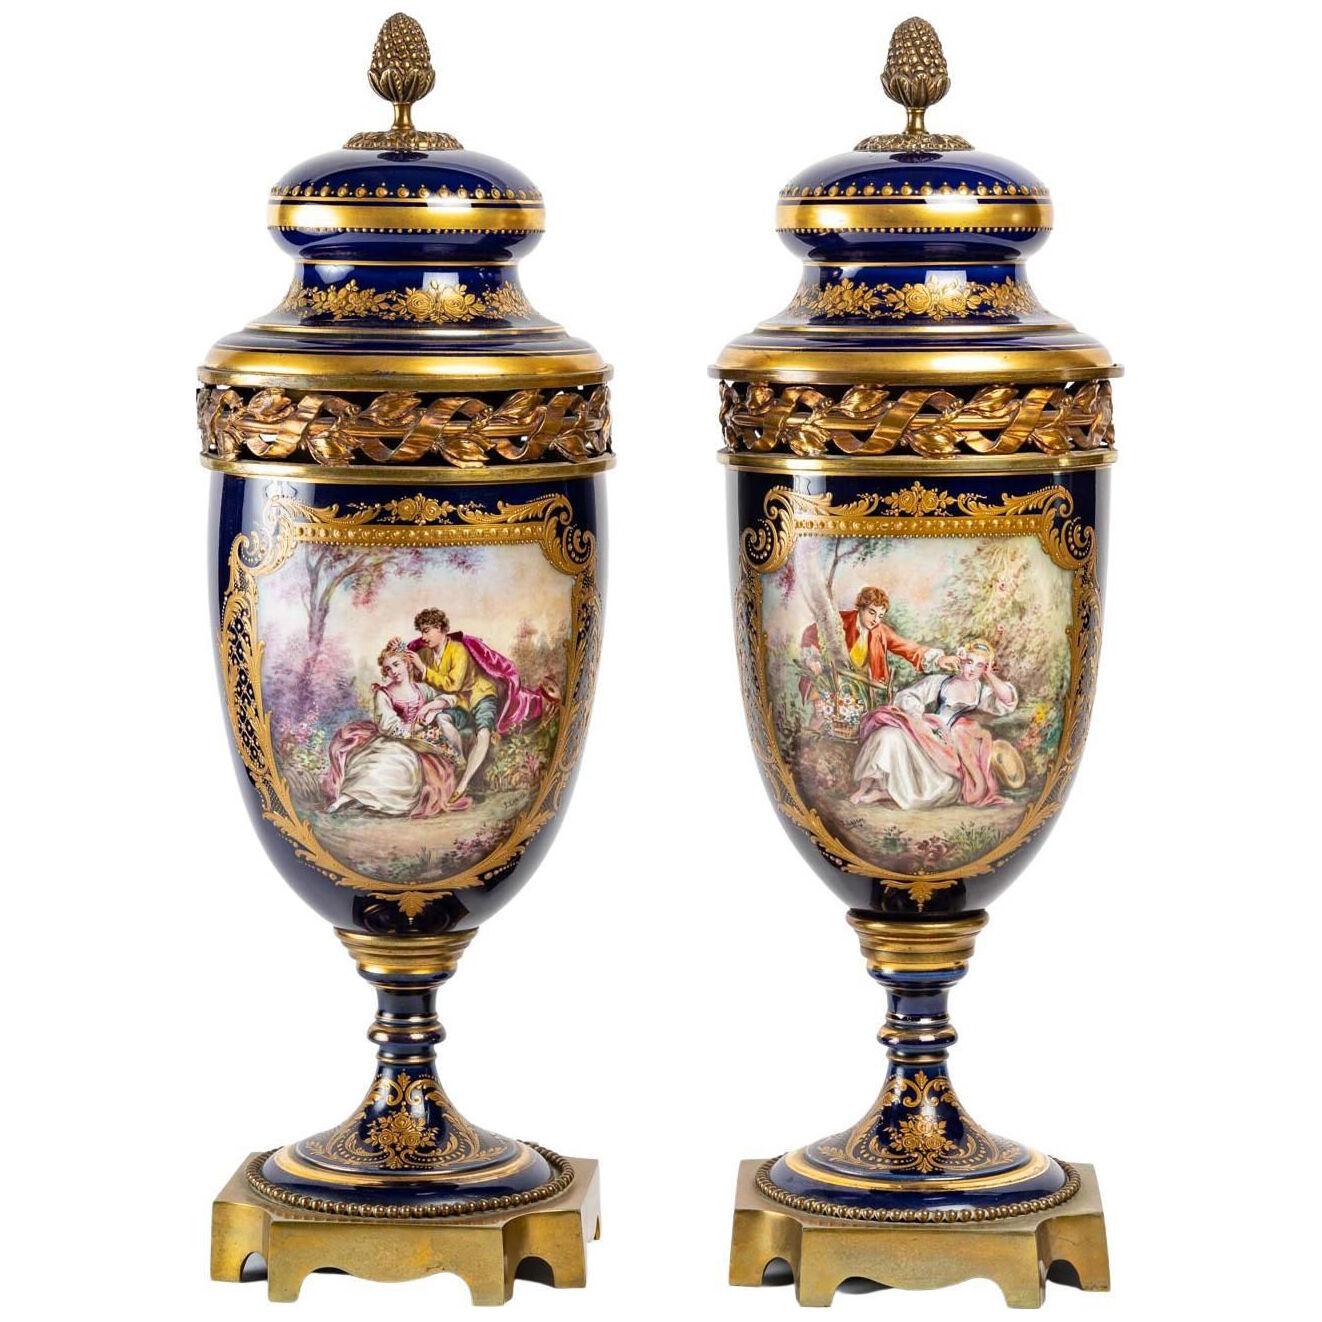 A pair of Sèvres Porcelain Covered Vases